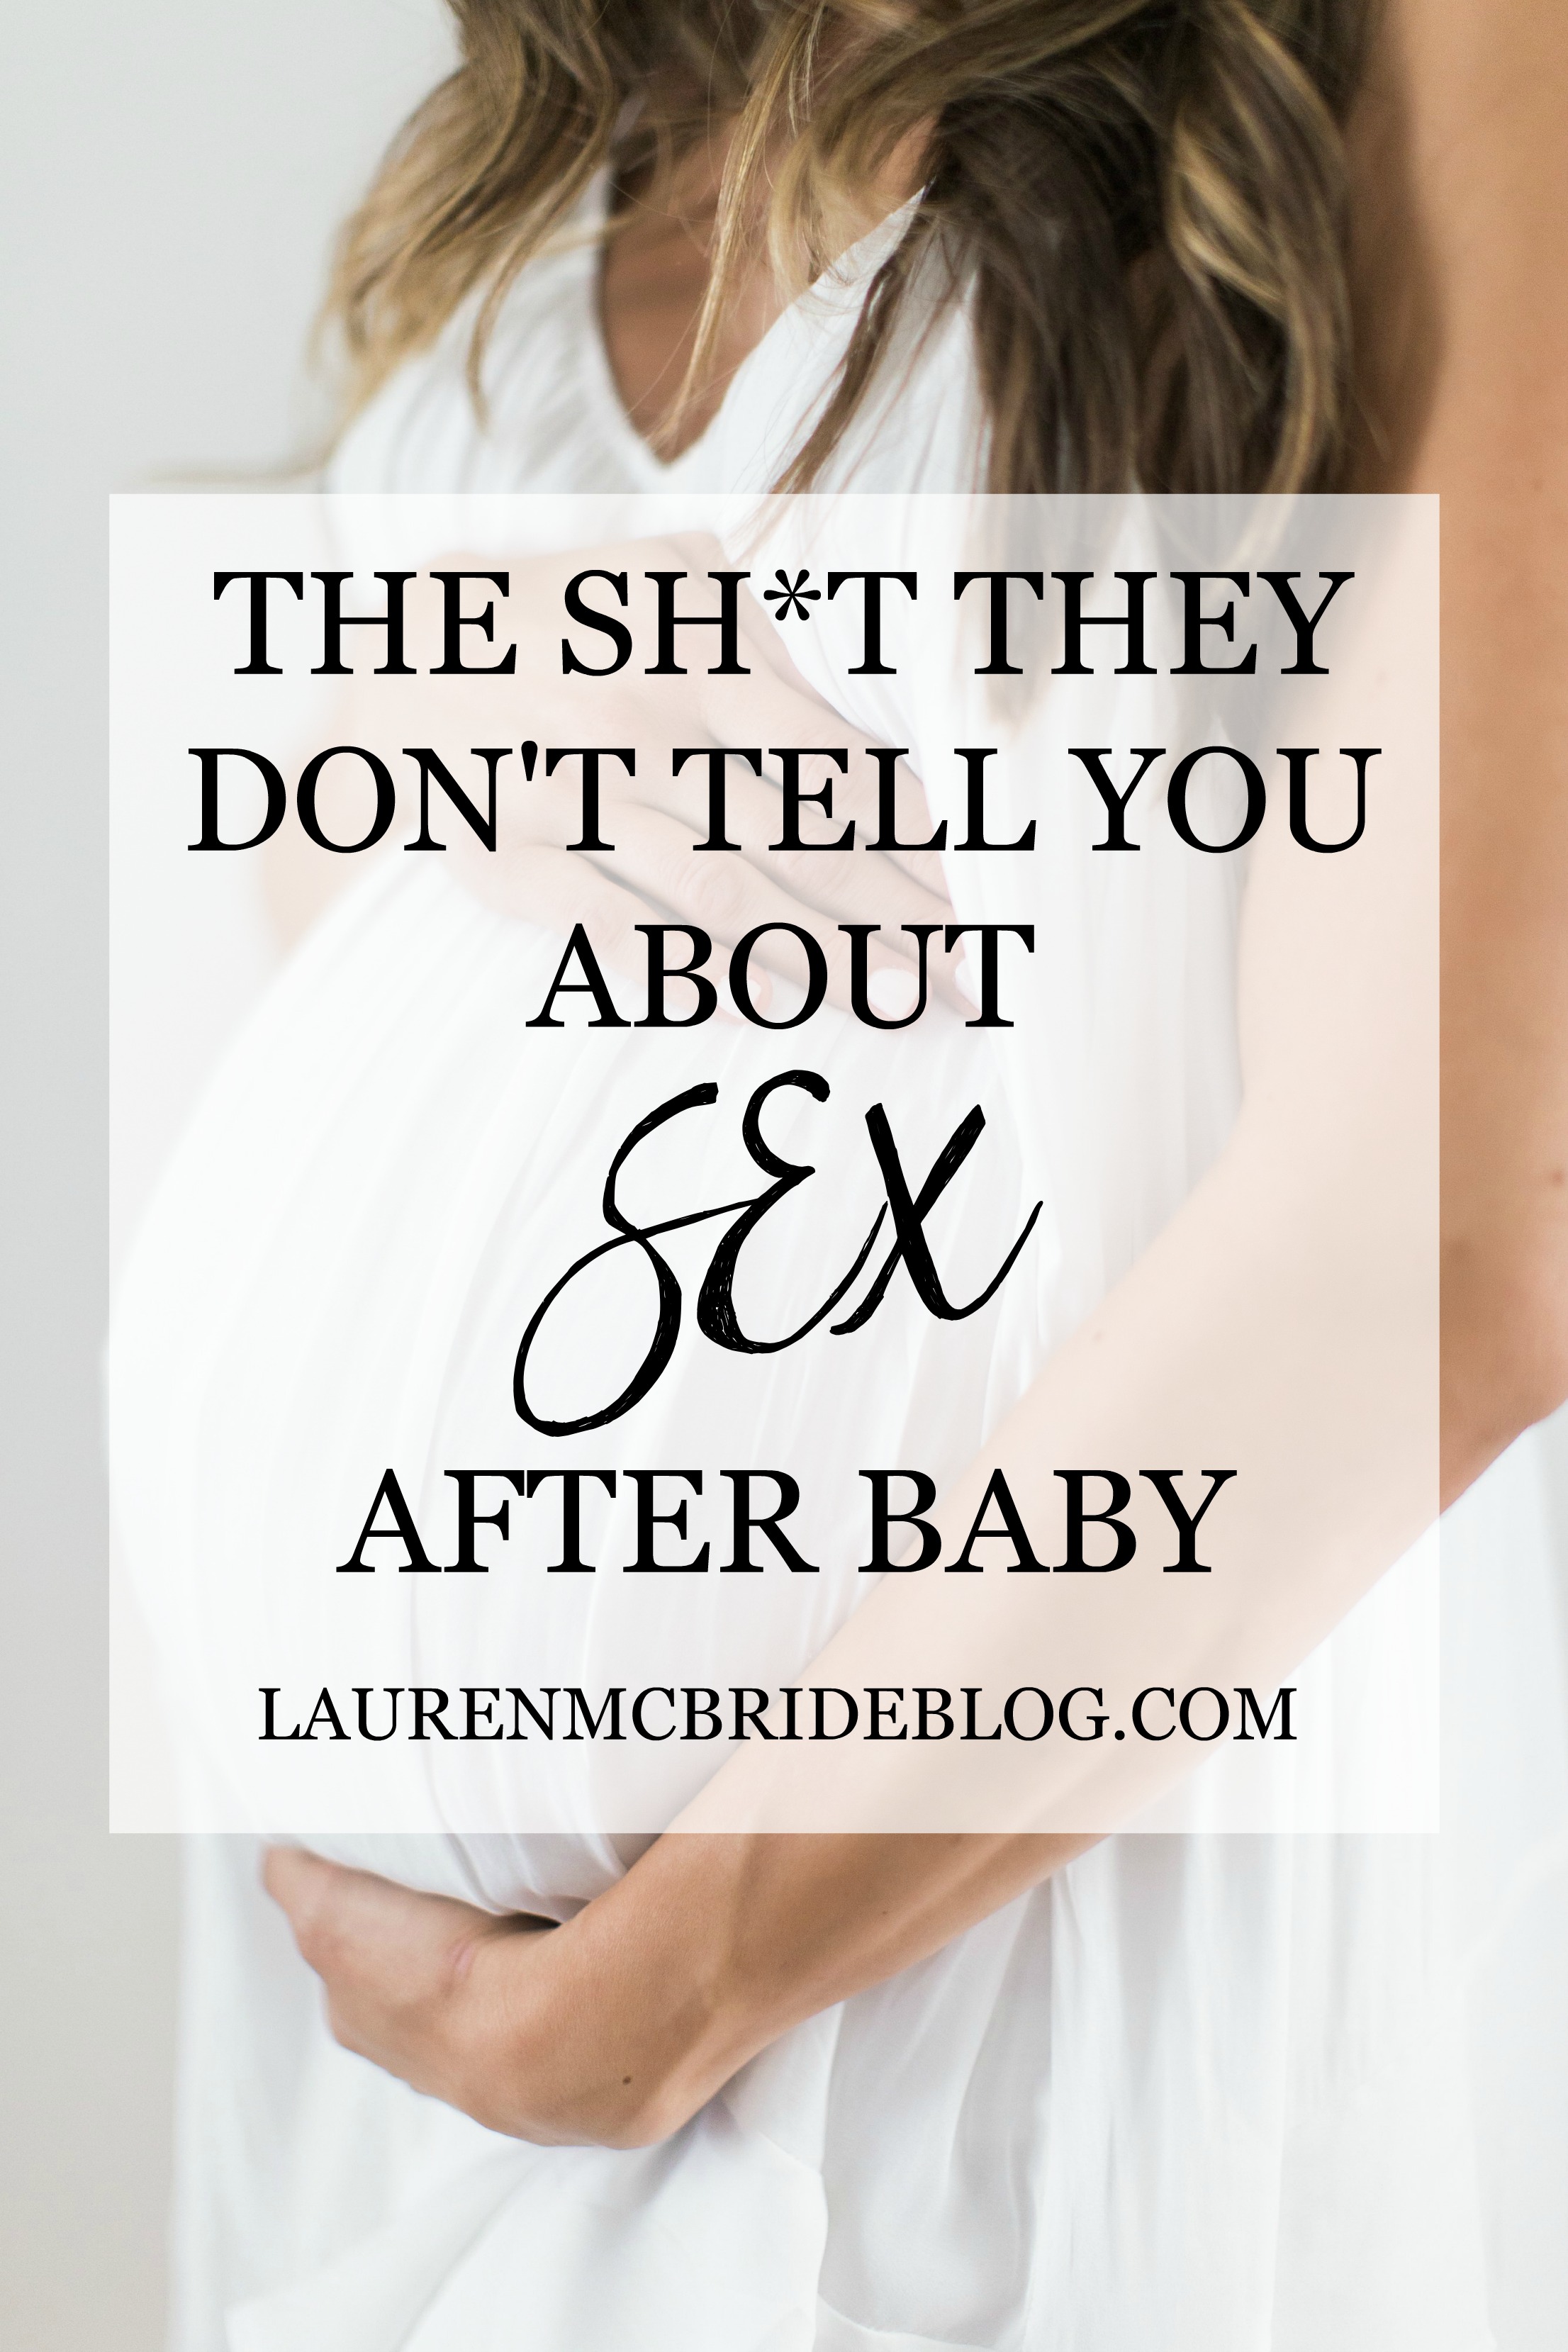 Connecticut life and style blogger Lauren McBride shares the truth about sex after having a baby, including what you may or may not experience and quotes from mothers.